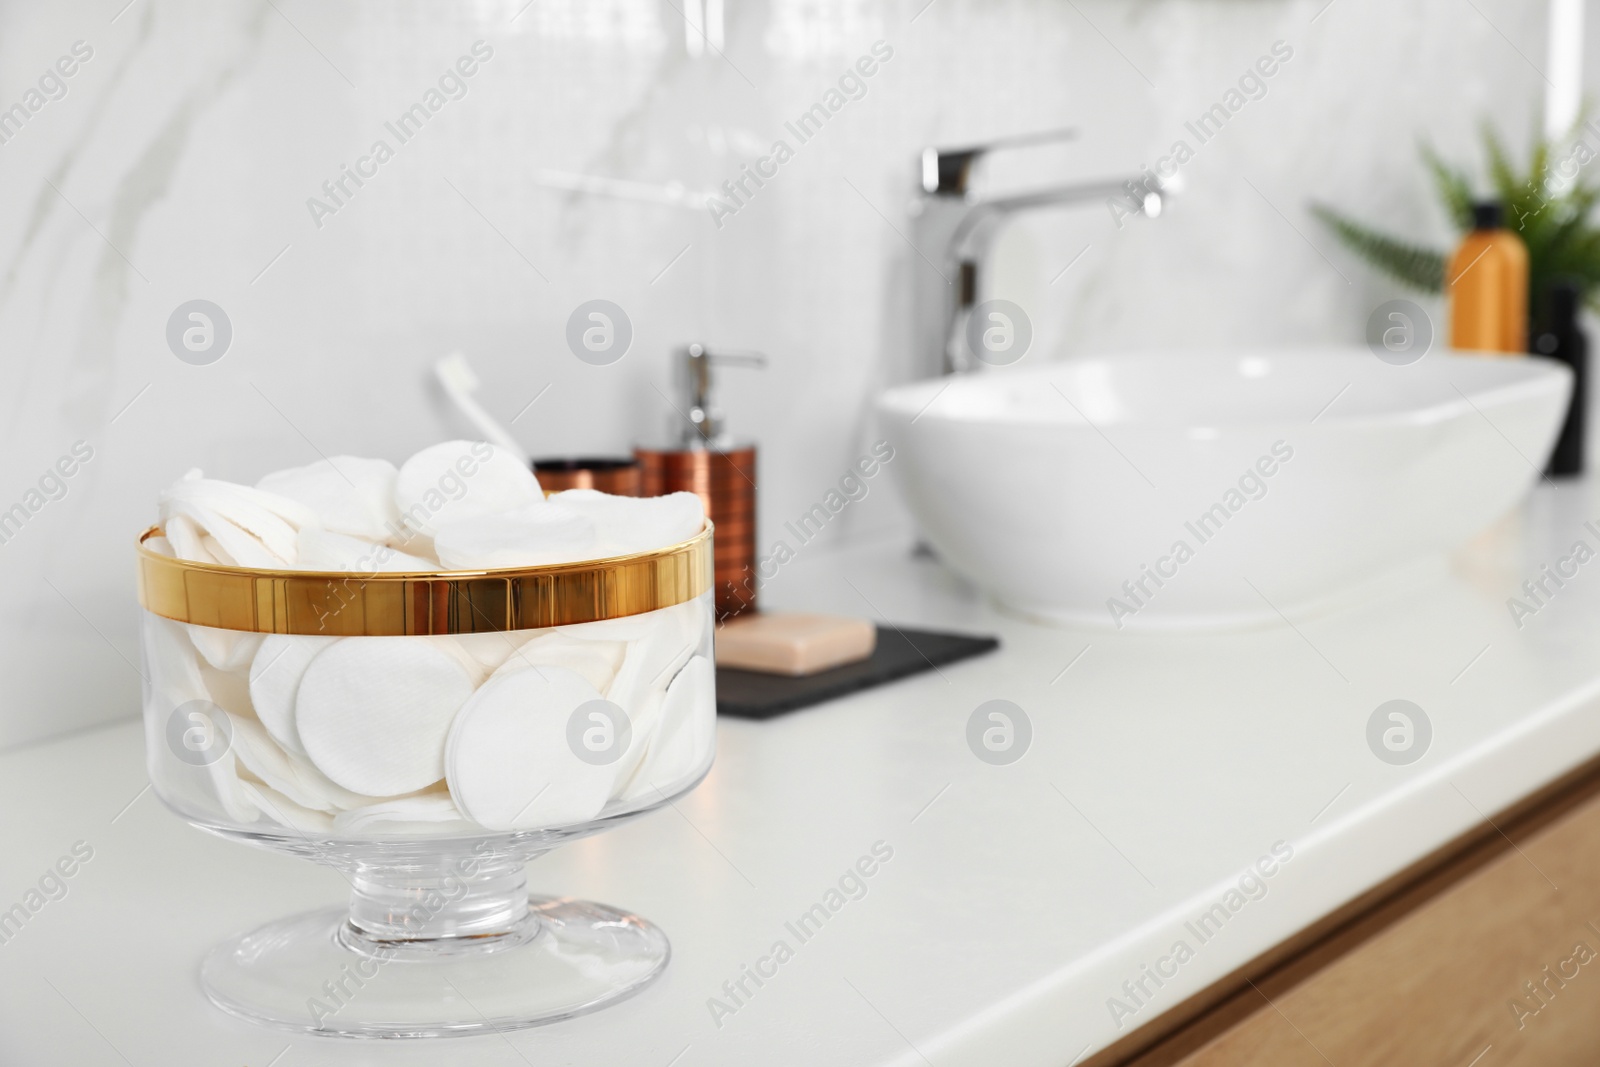 Photo of Jar with cotton pads on bathroom countertop